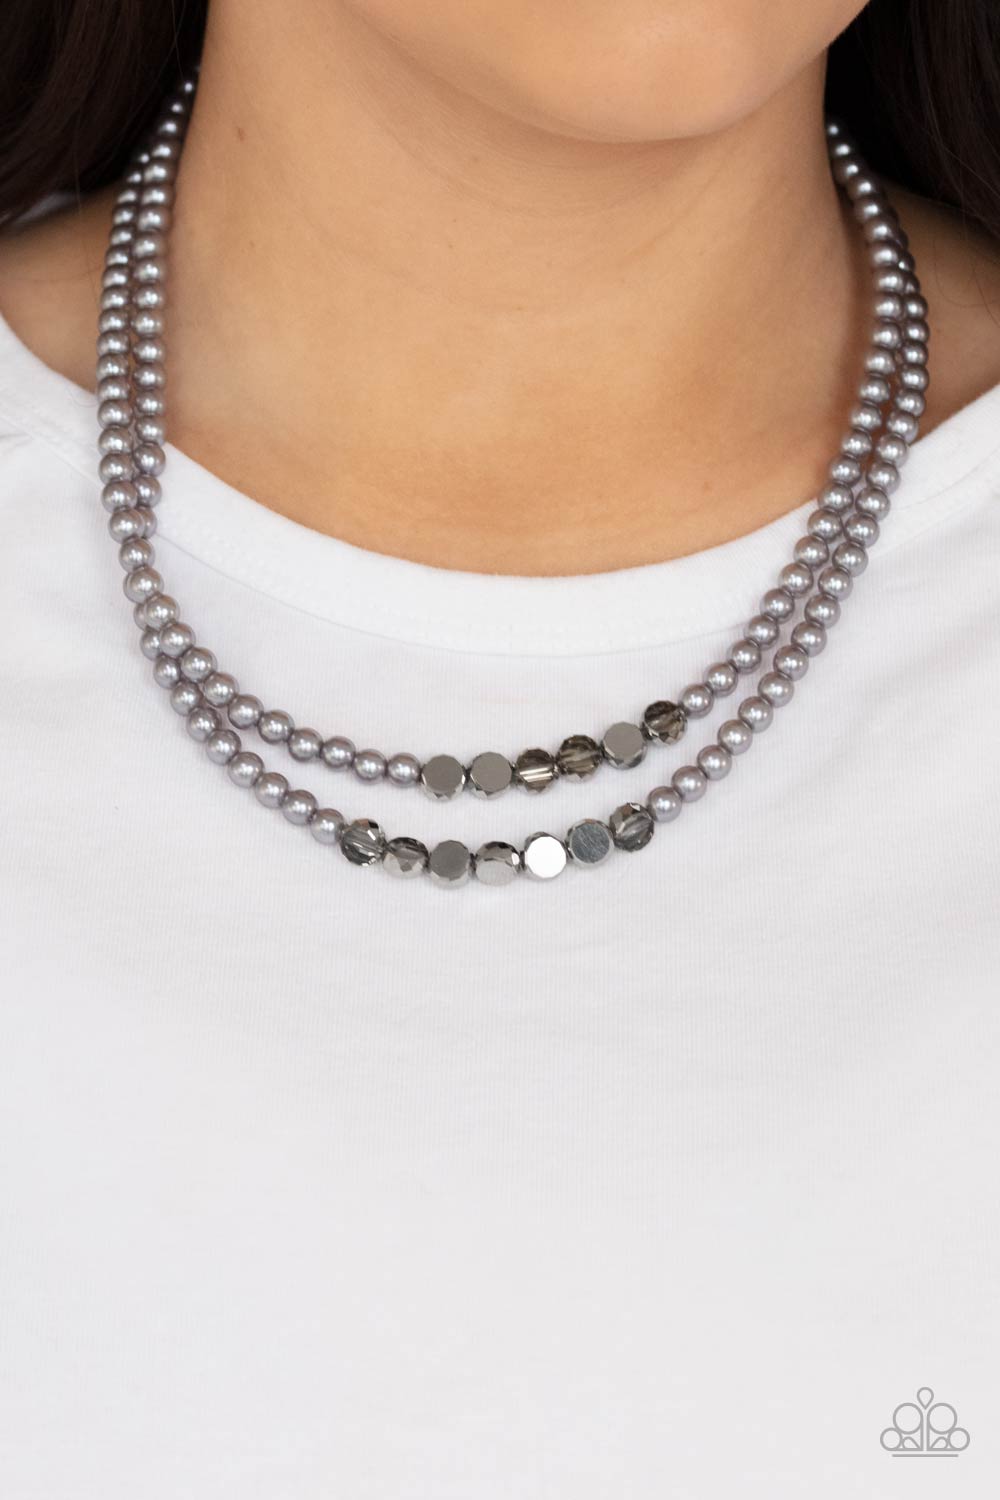 Poshly Petite Silver Necklace - Paparazzi Accessories.  A posh collection of pearly gray beads, accented by sections of flat, faceted metallic beads, is threaded along invisible wires, creating sophisticated layers that fall below the collar. Features an adjustable clasp closure.  ﻿All Paparazzi Accessories are lead free and nickel free!  Sold as one individual necklace. Includes one pair of matching earrings.